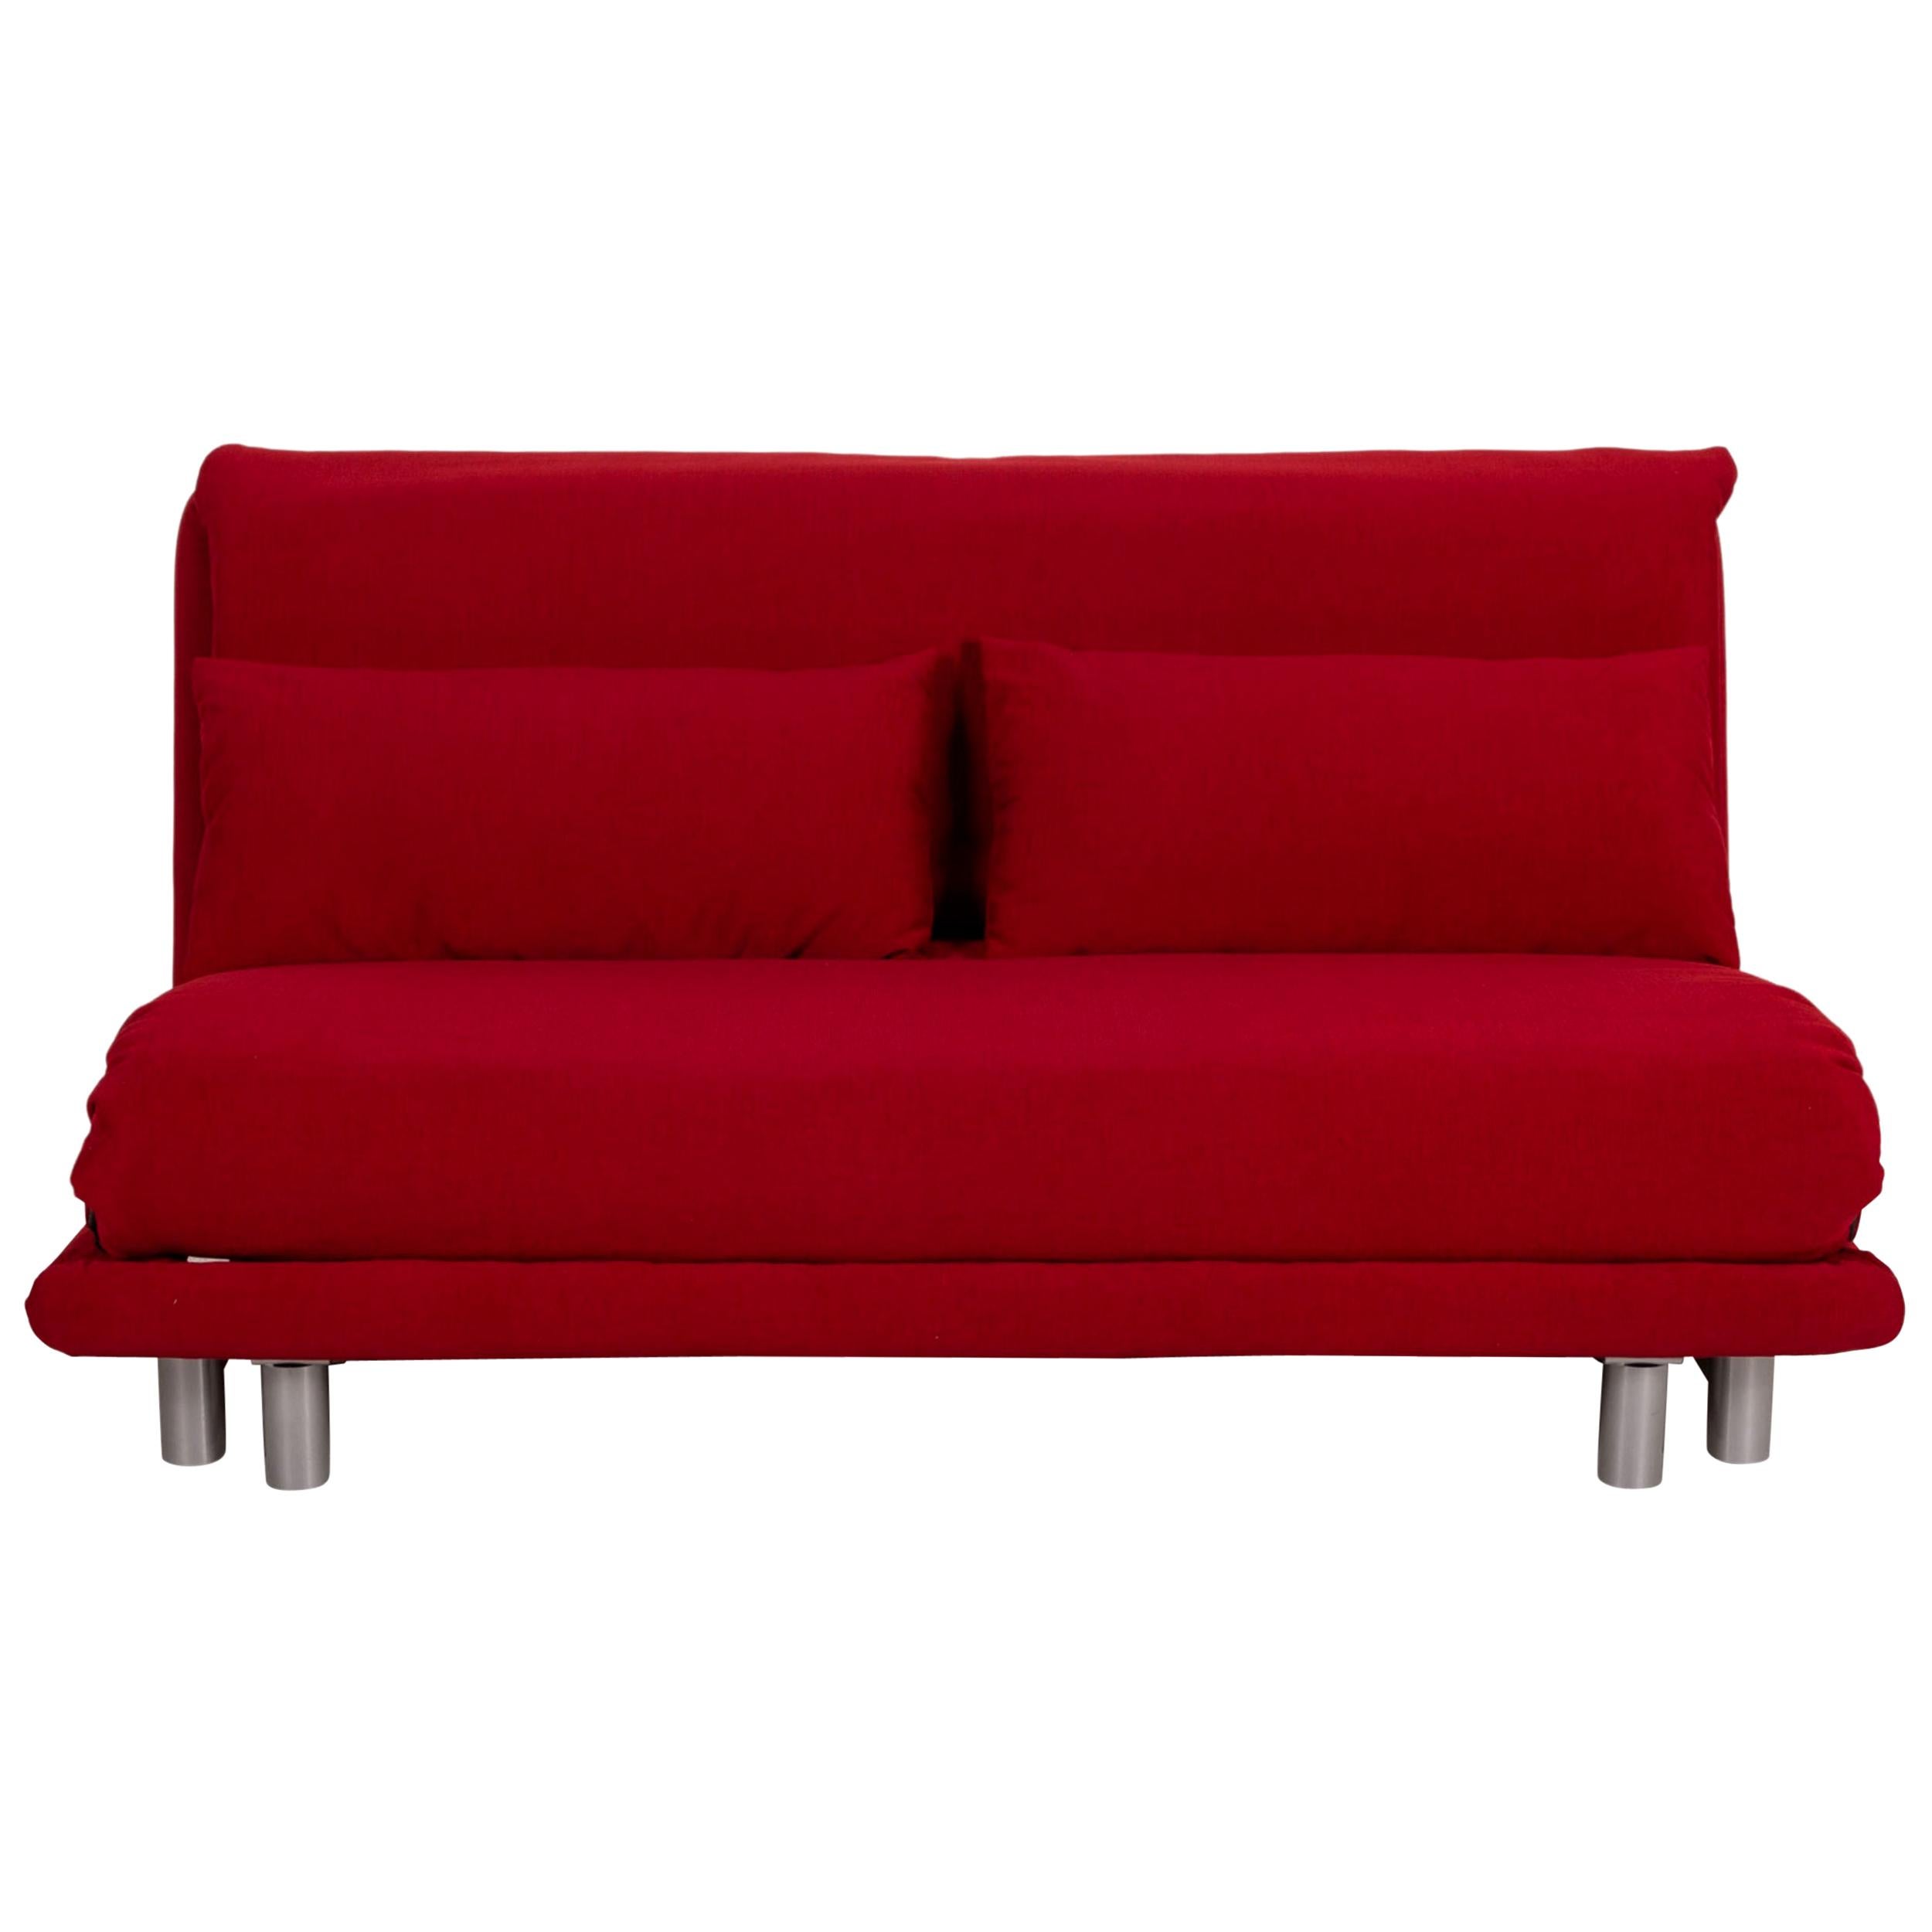 Ligne Roset Multy Fabric Sofa Bordeaux Two-Seater Couch Function Sleeping